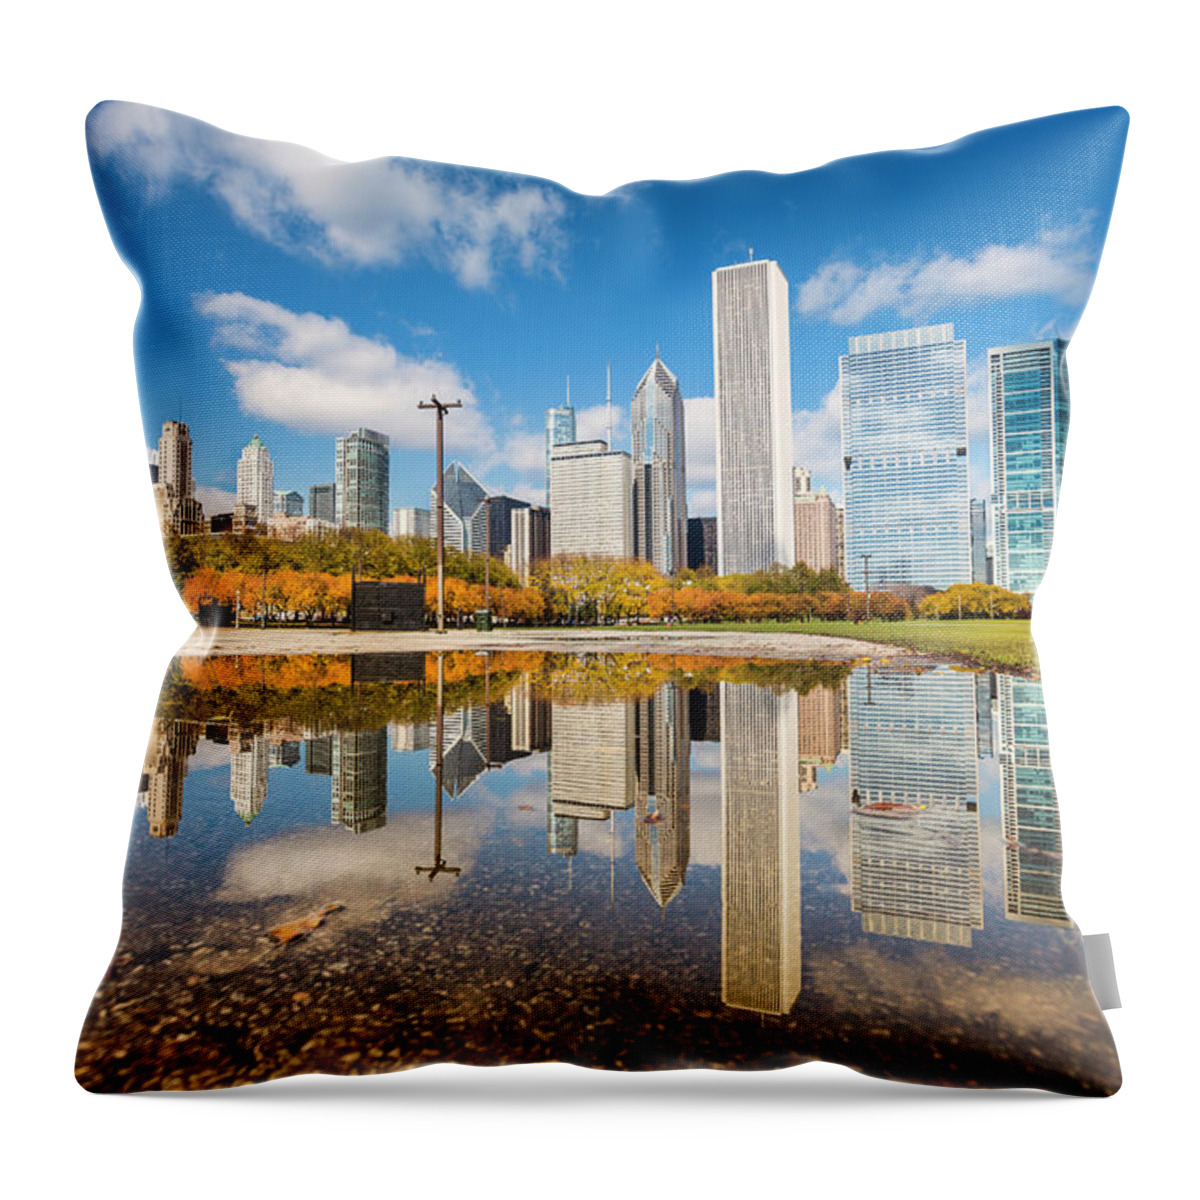 Lake Michigan Throw Pillow featuring the photograph Chicago Illinois Skyline Reflection by Pgiam